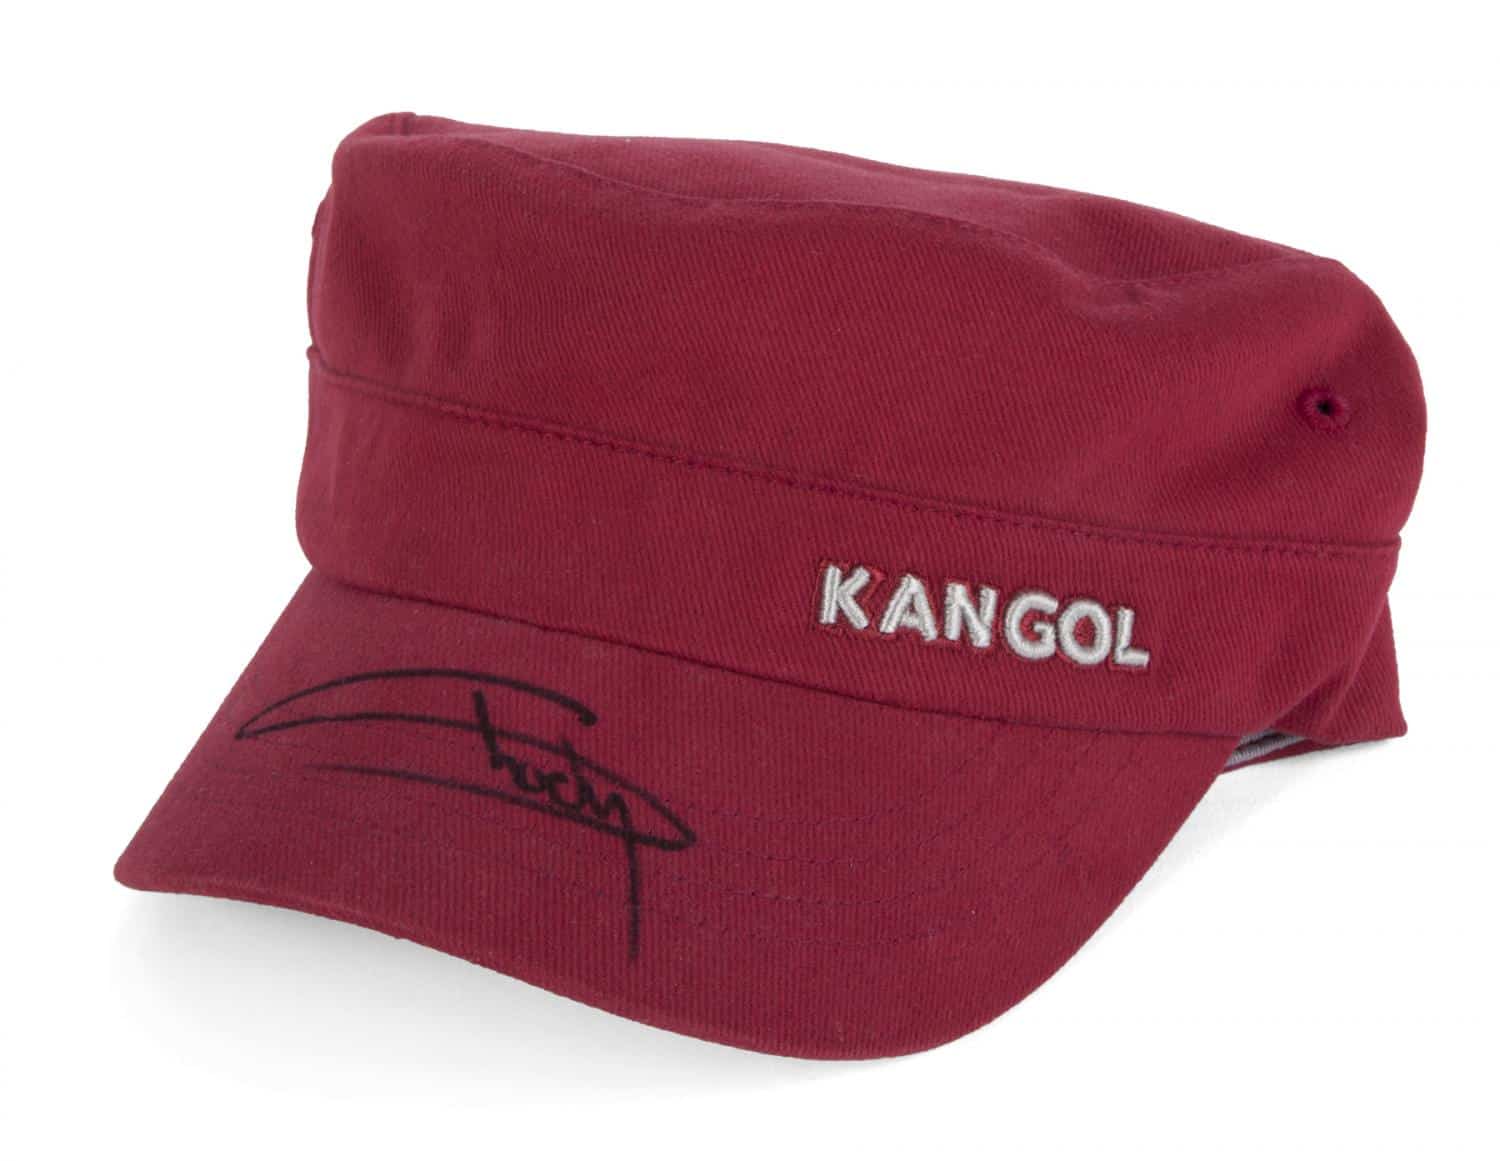 Eminem's Shady Signed Kangol Cap Sold For $6,400 In A Charity Auction